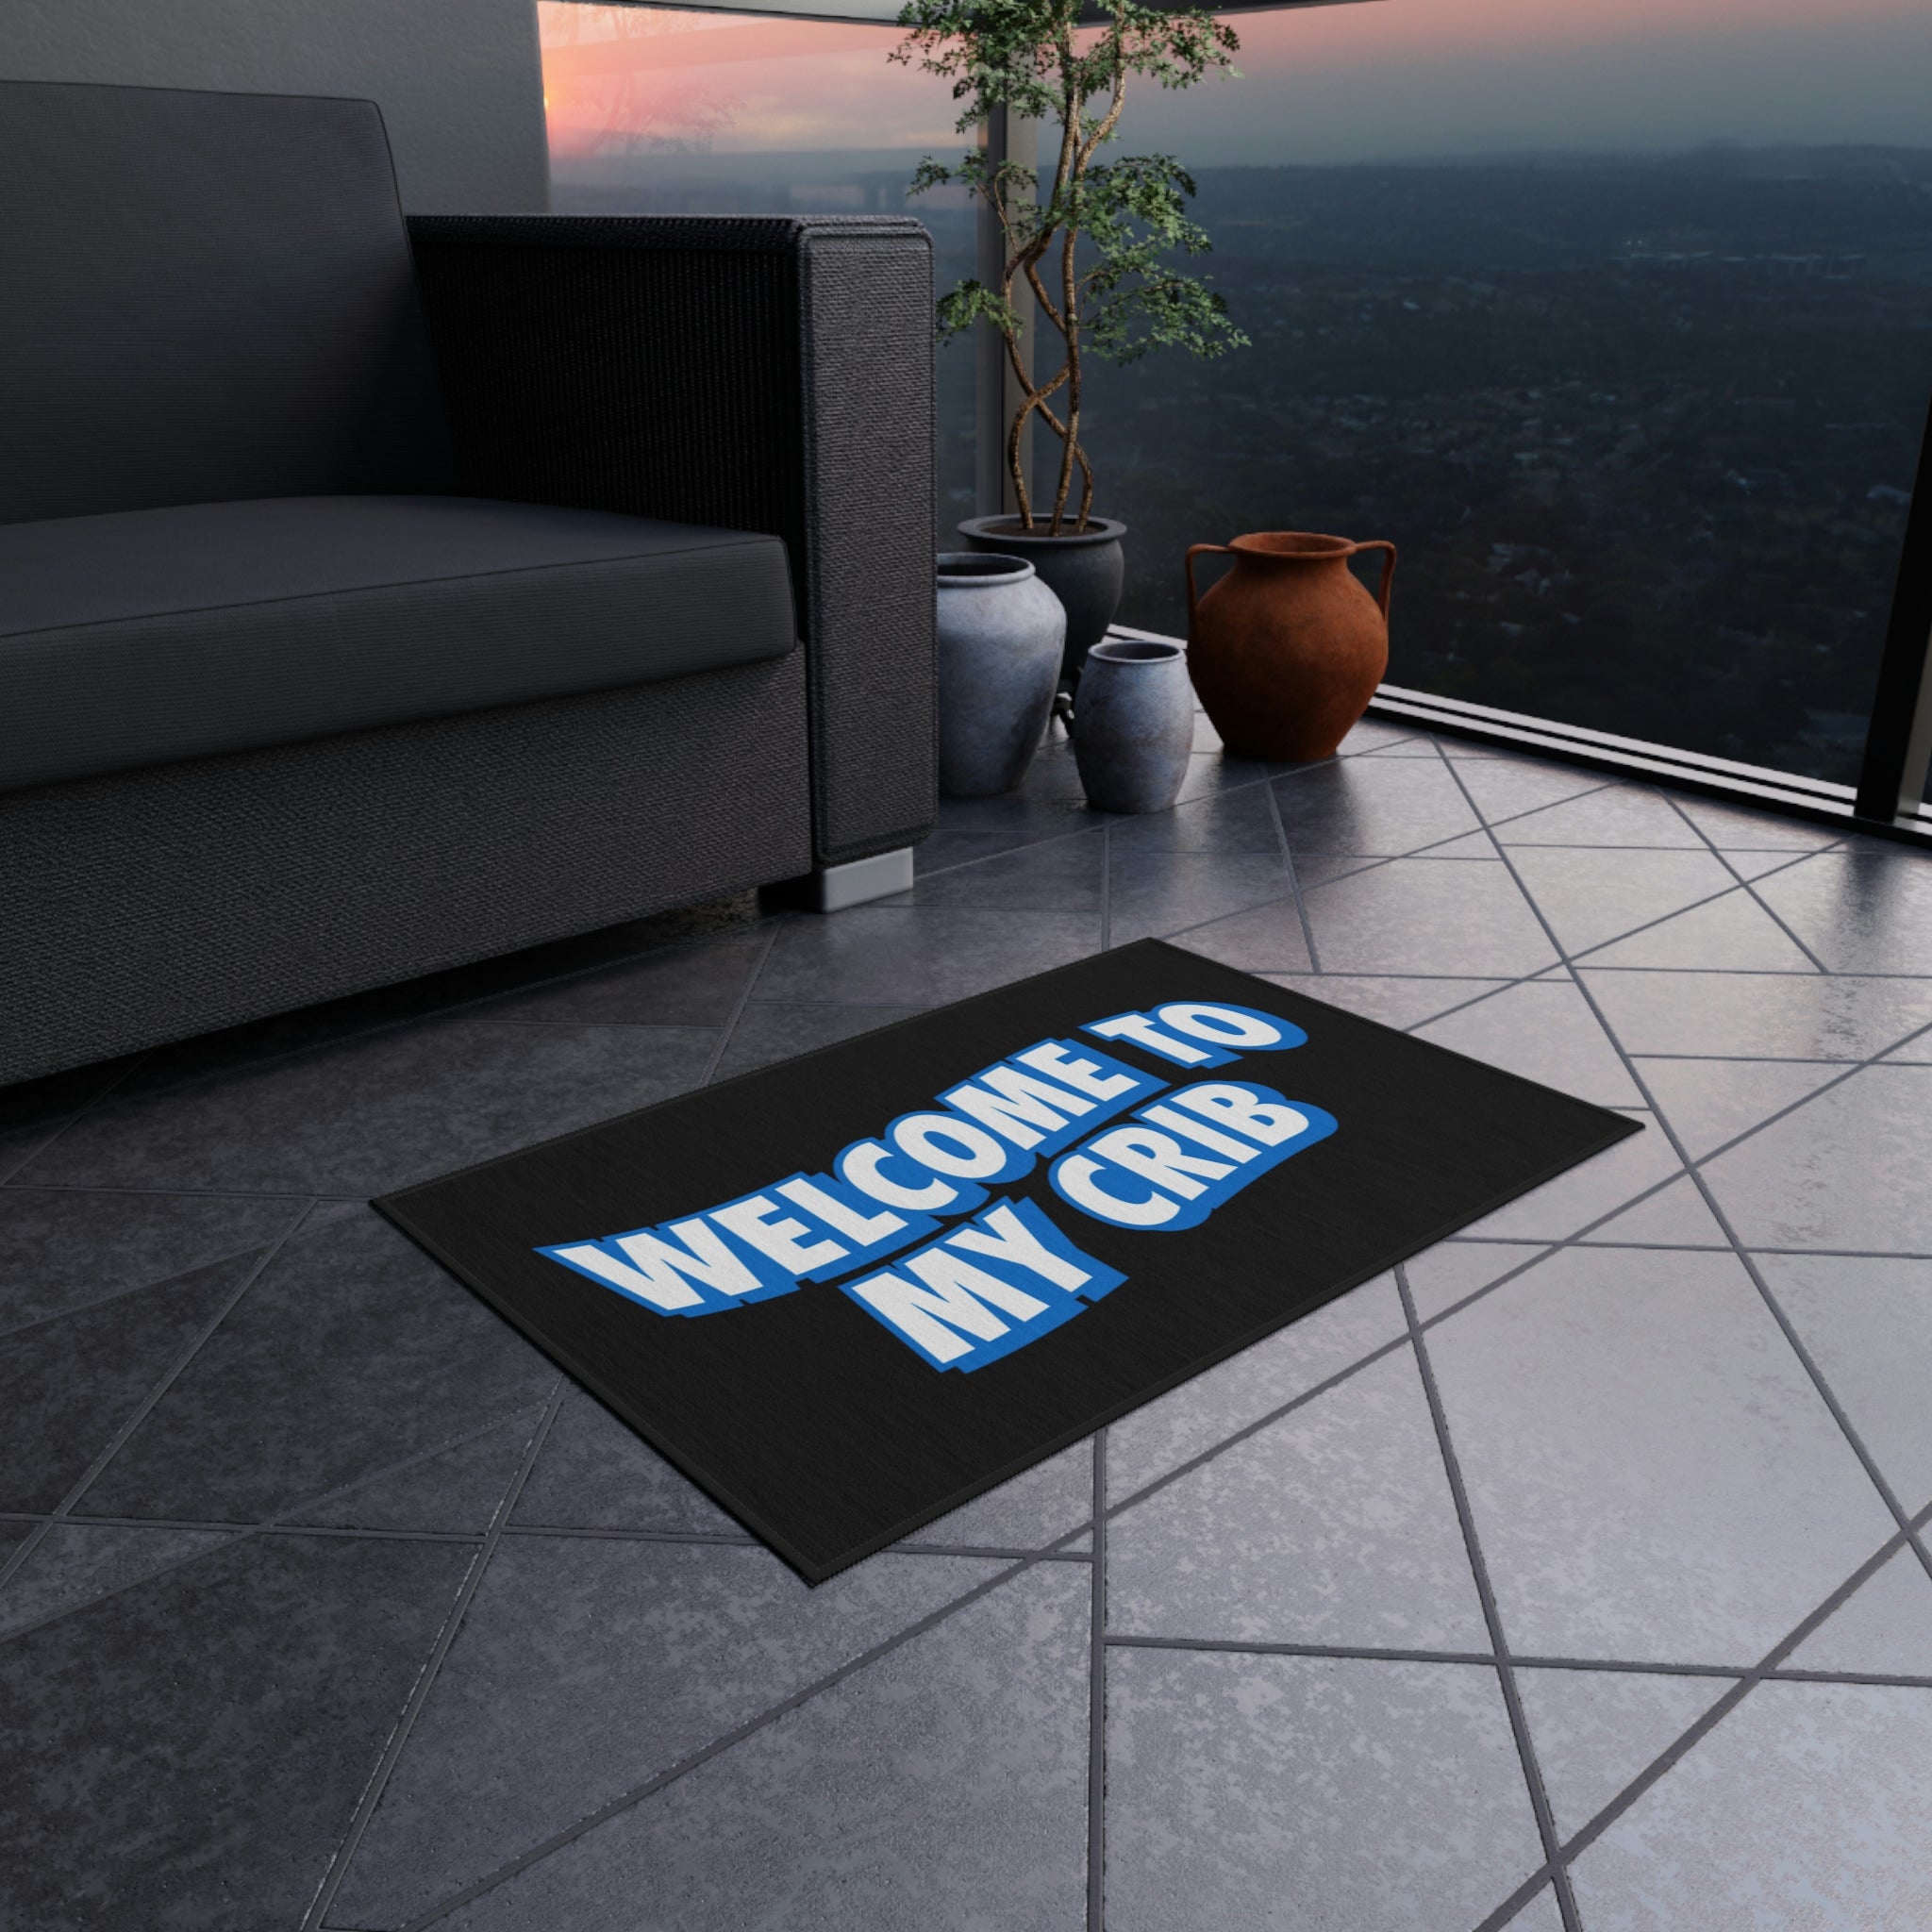 24"×36" Welcome To My Crib Outdoor Rug